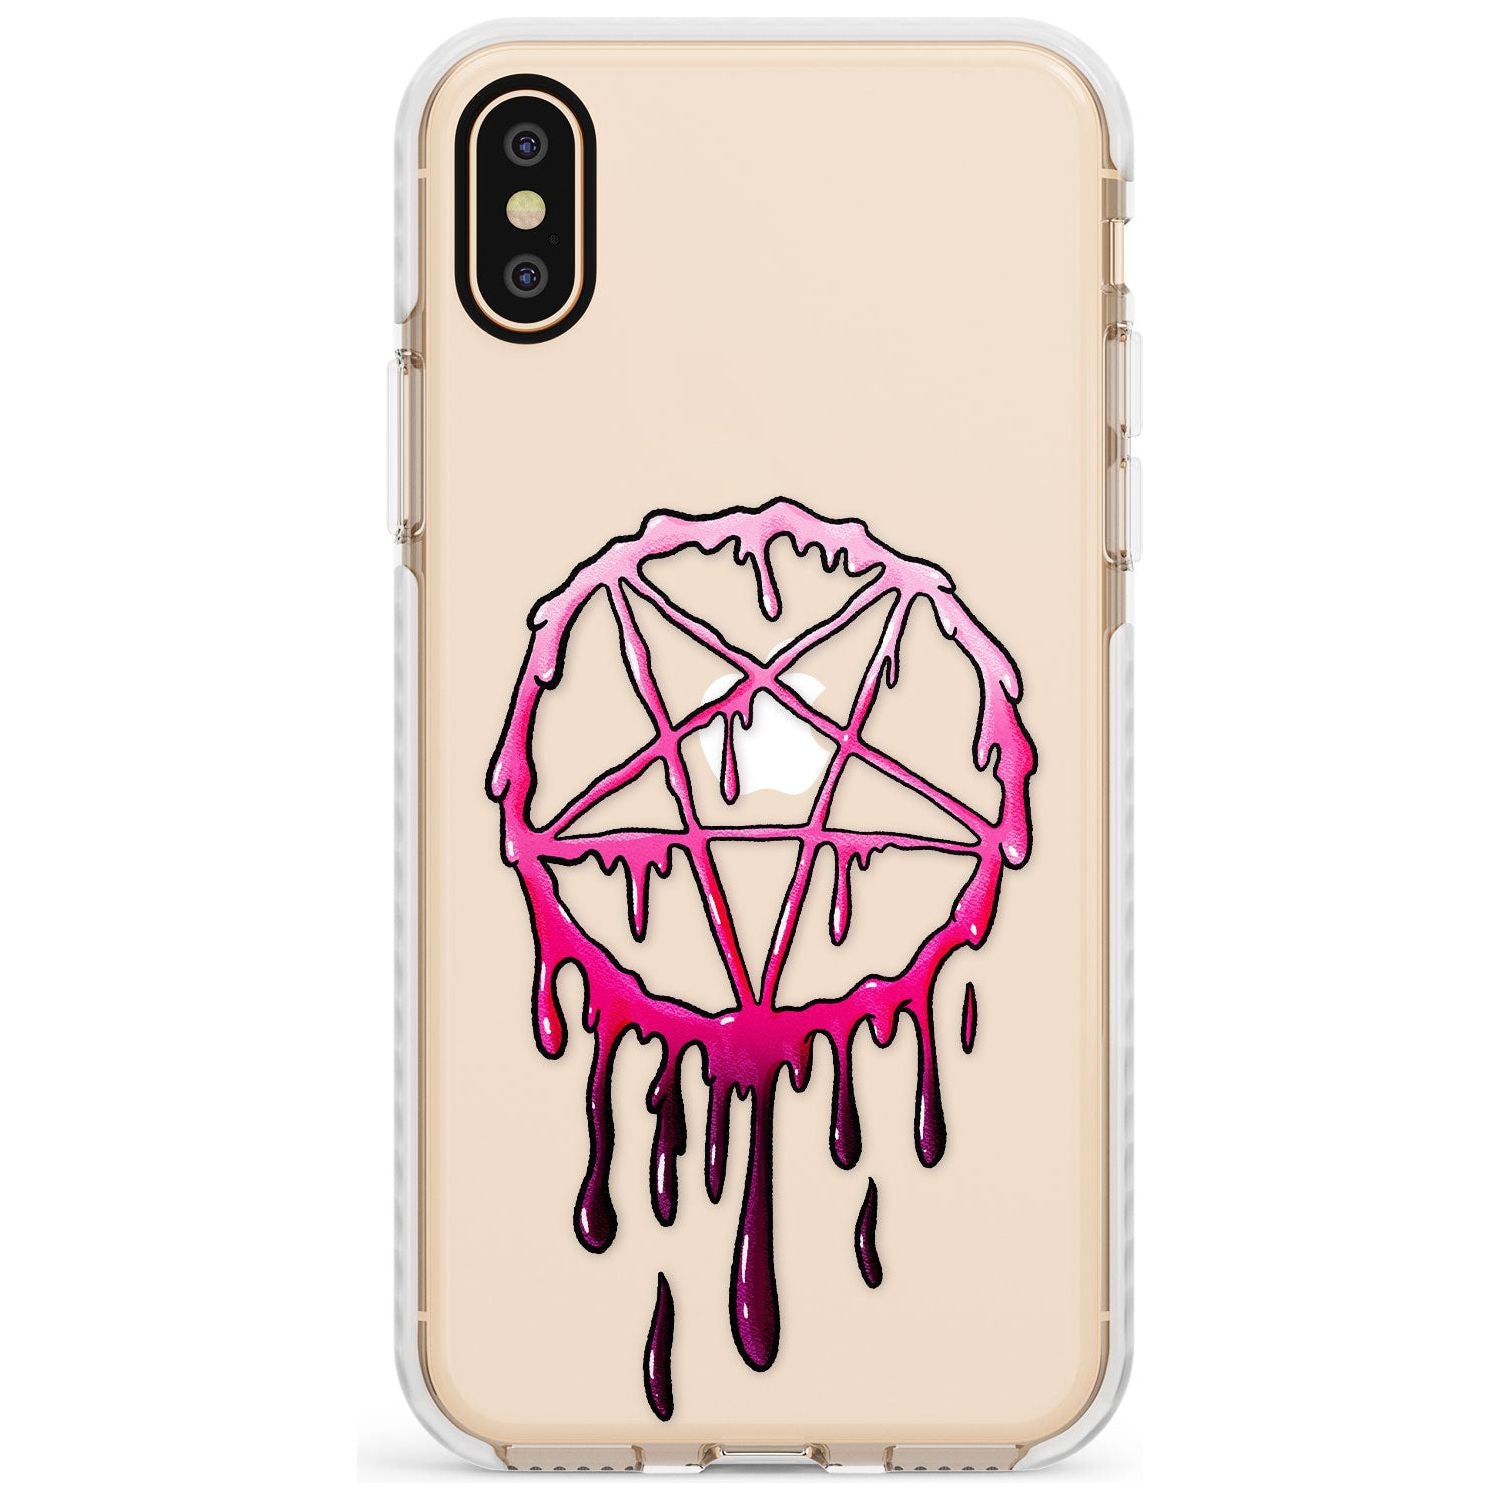 Pentagram of Blood Impact Phone Case for iPhone X XS Max XR